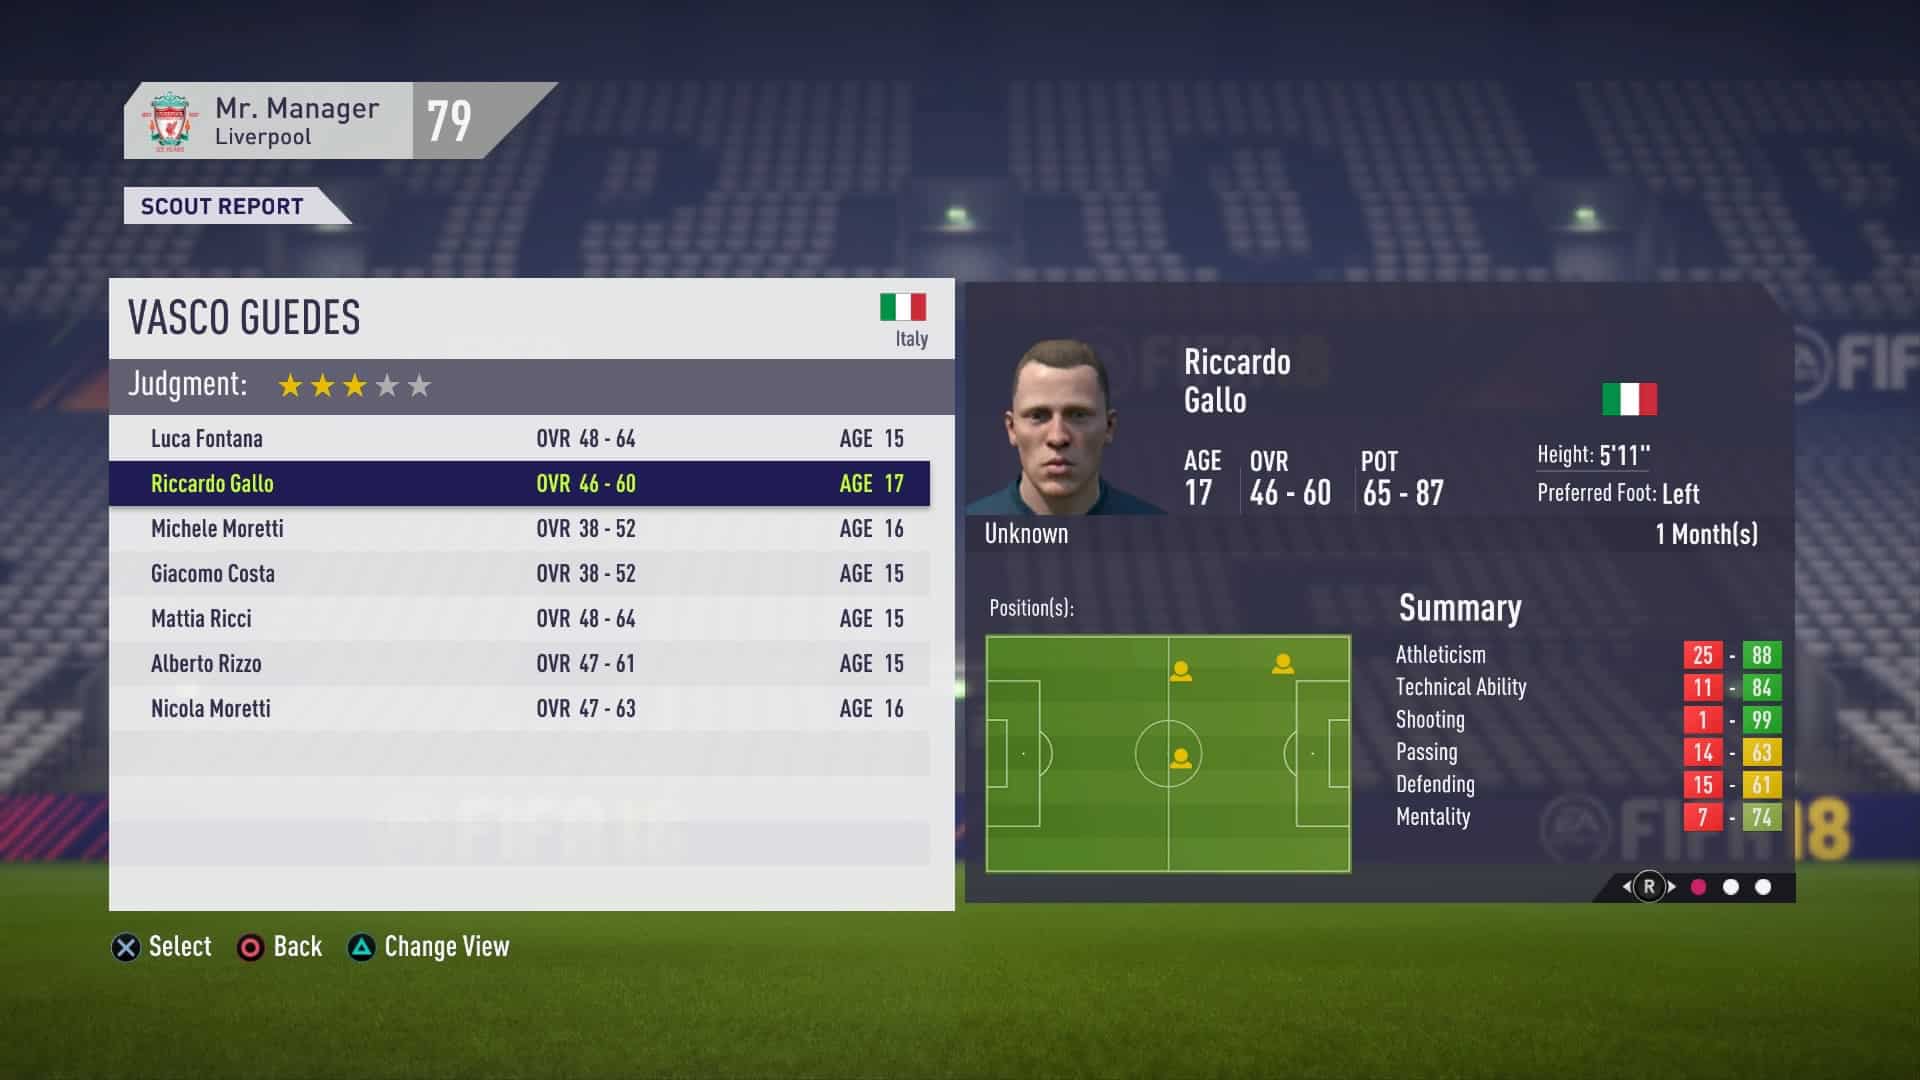 Monthly Scouting Report View